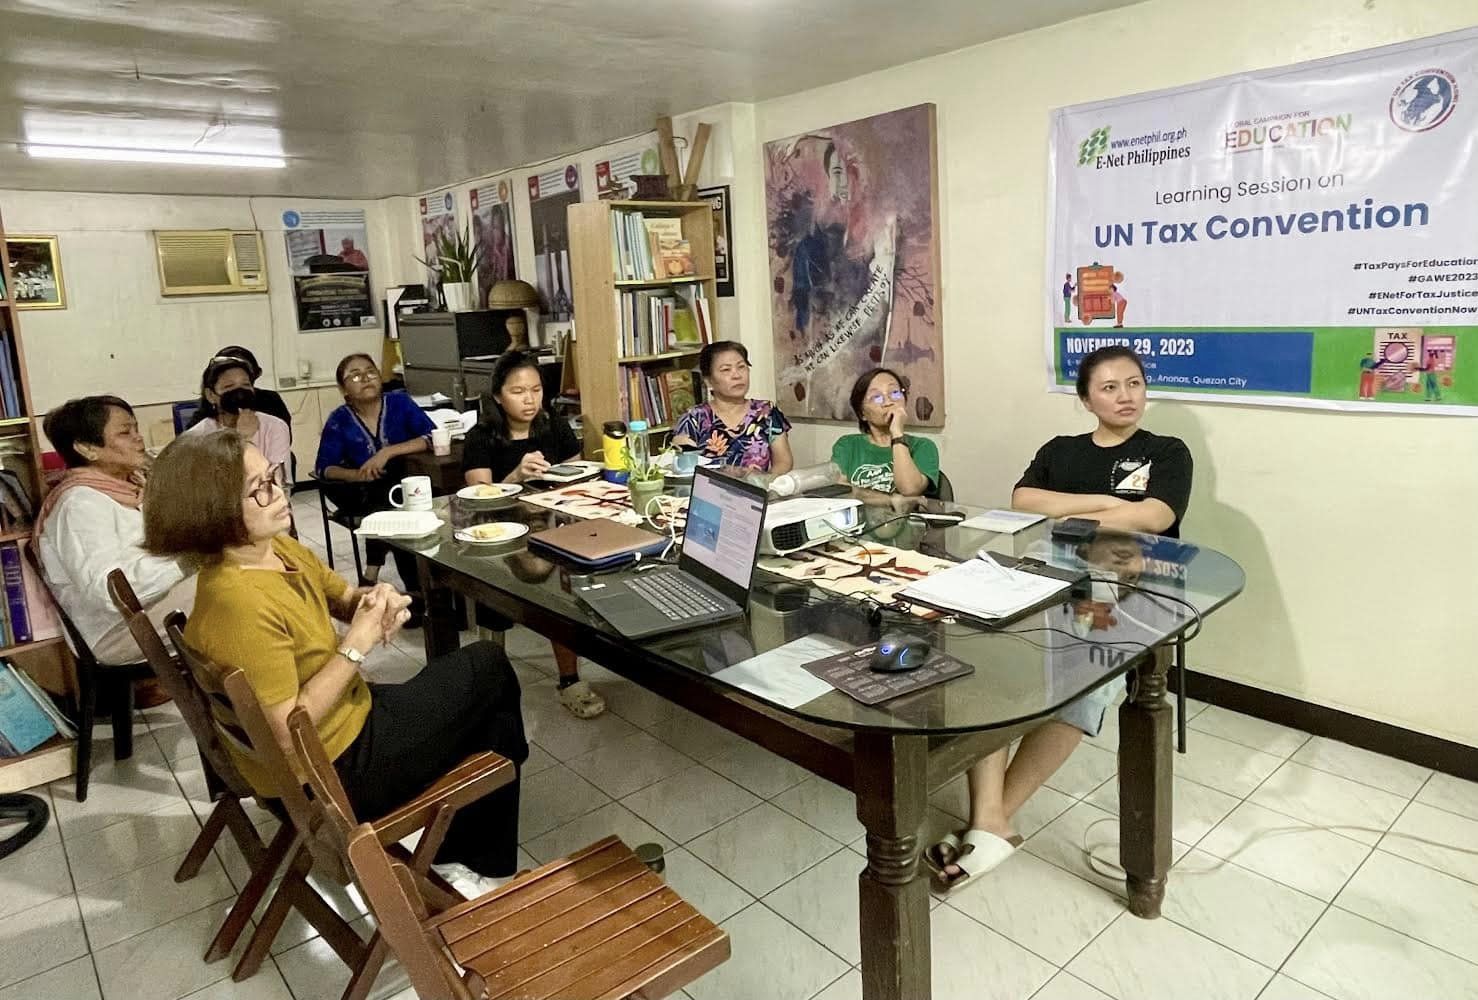 Read more about the article E-Net Philippines and Global Campaign for Education Learning Session on UN Tax Convention